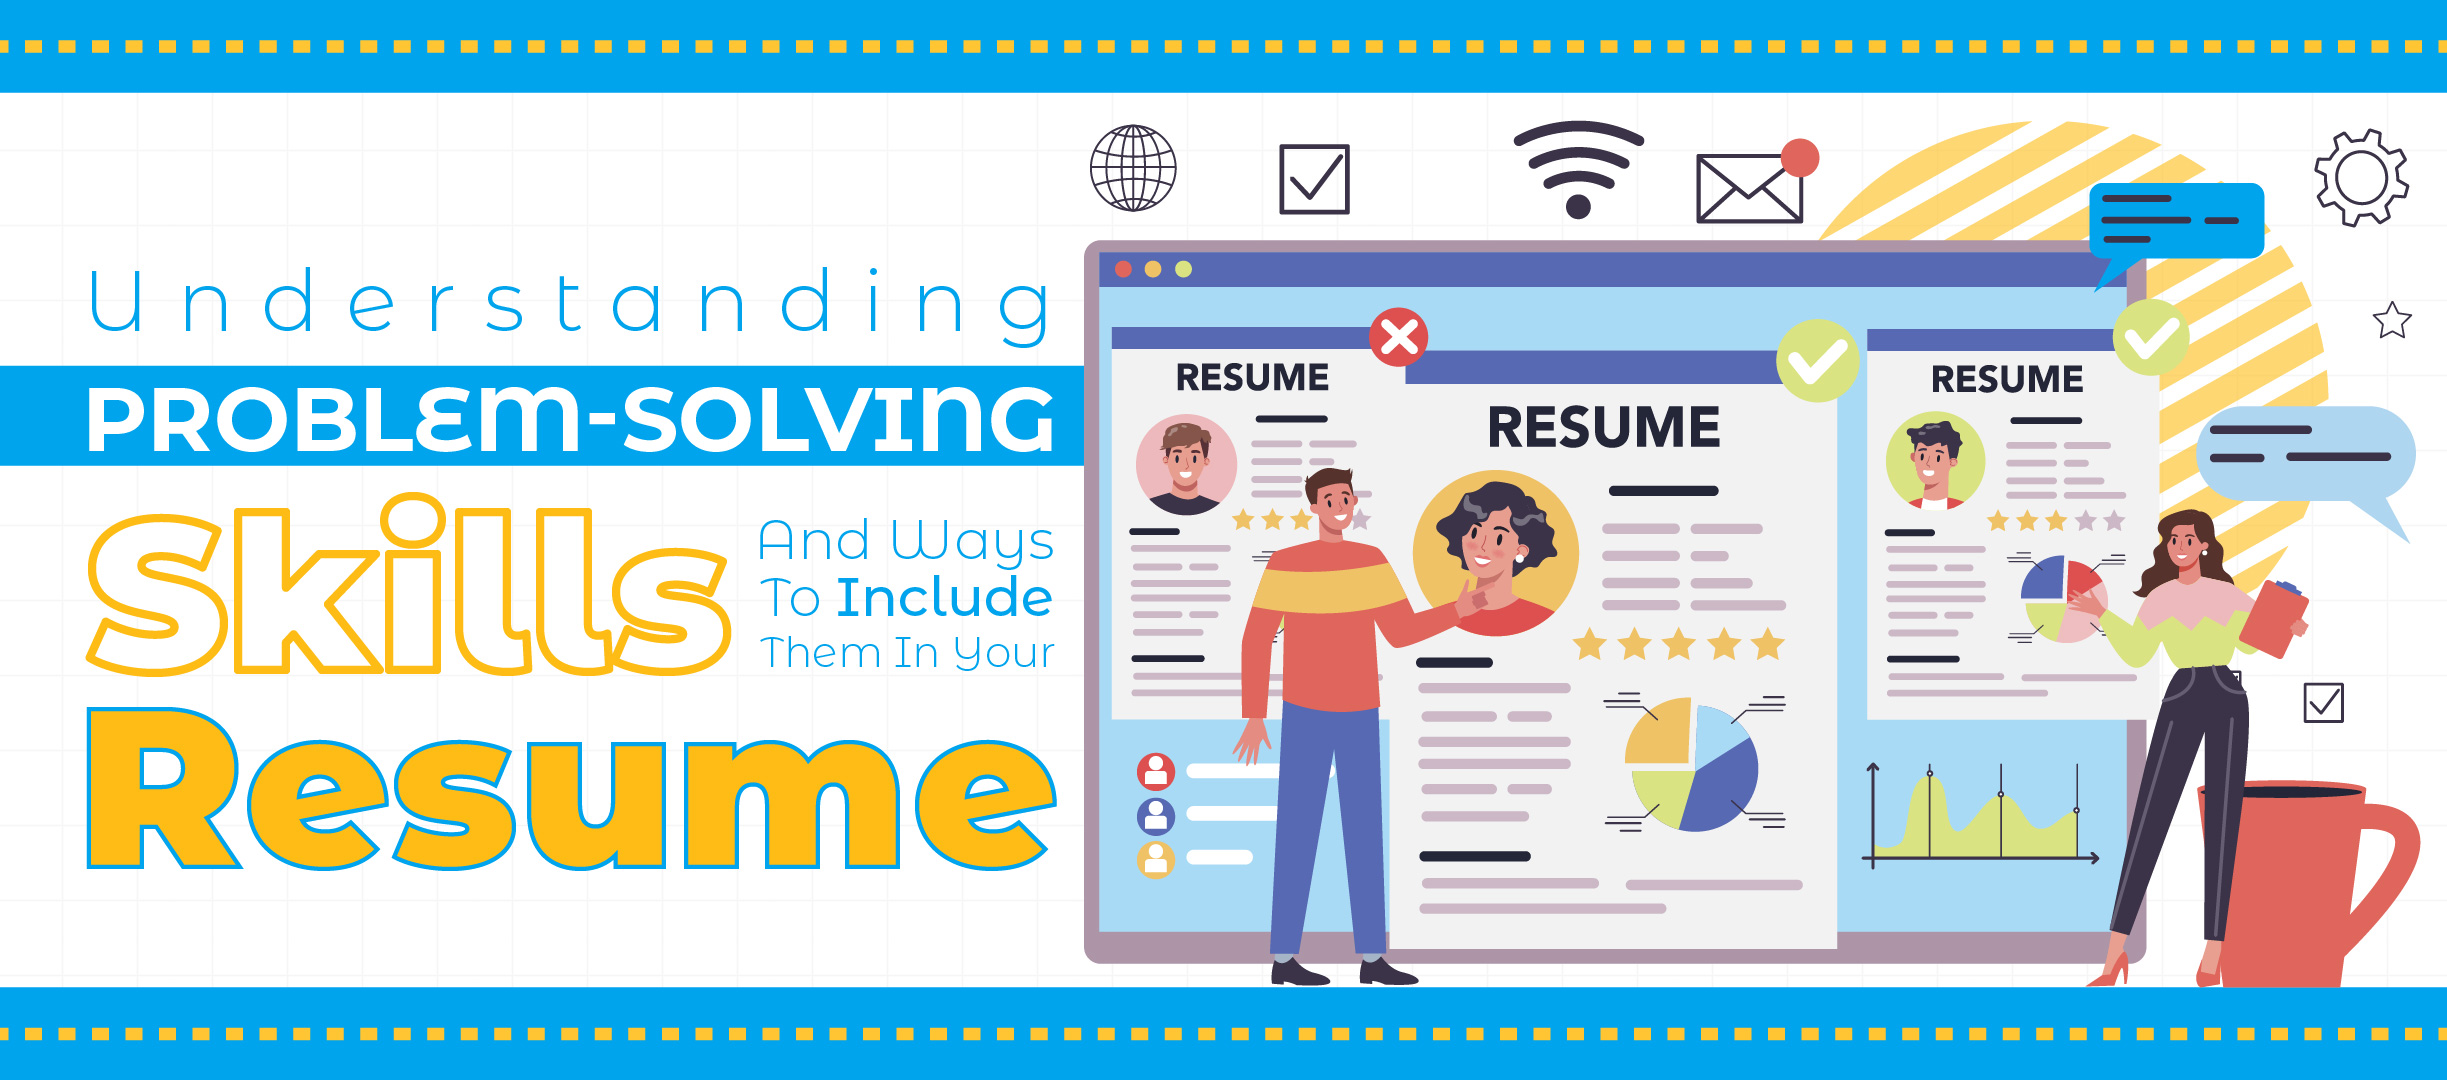 Understanding Problem-Solving Skills and Ways to Include Them In Your Resume